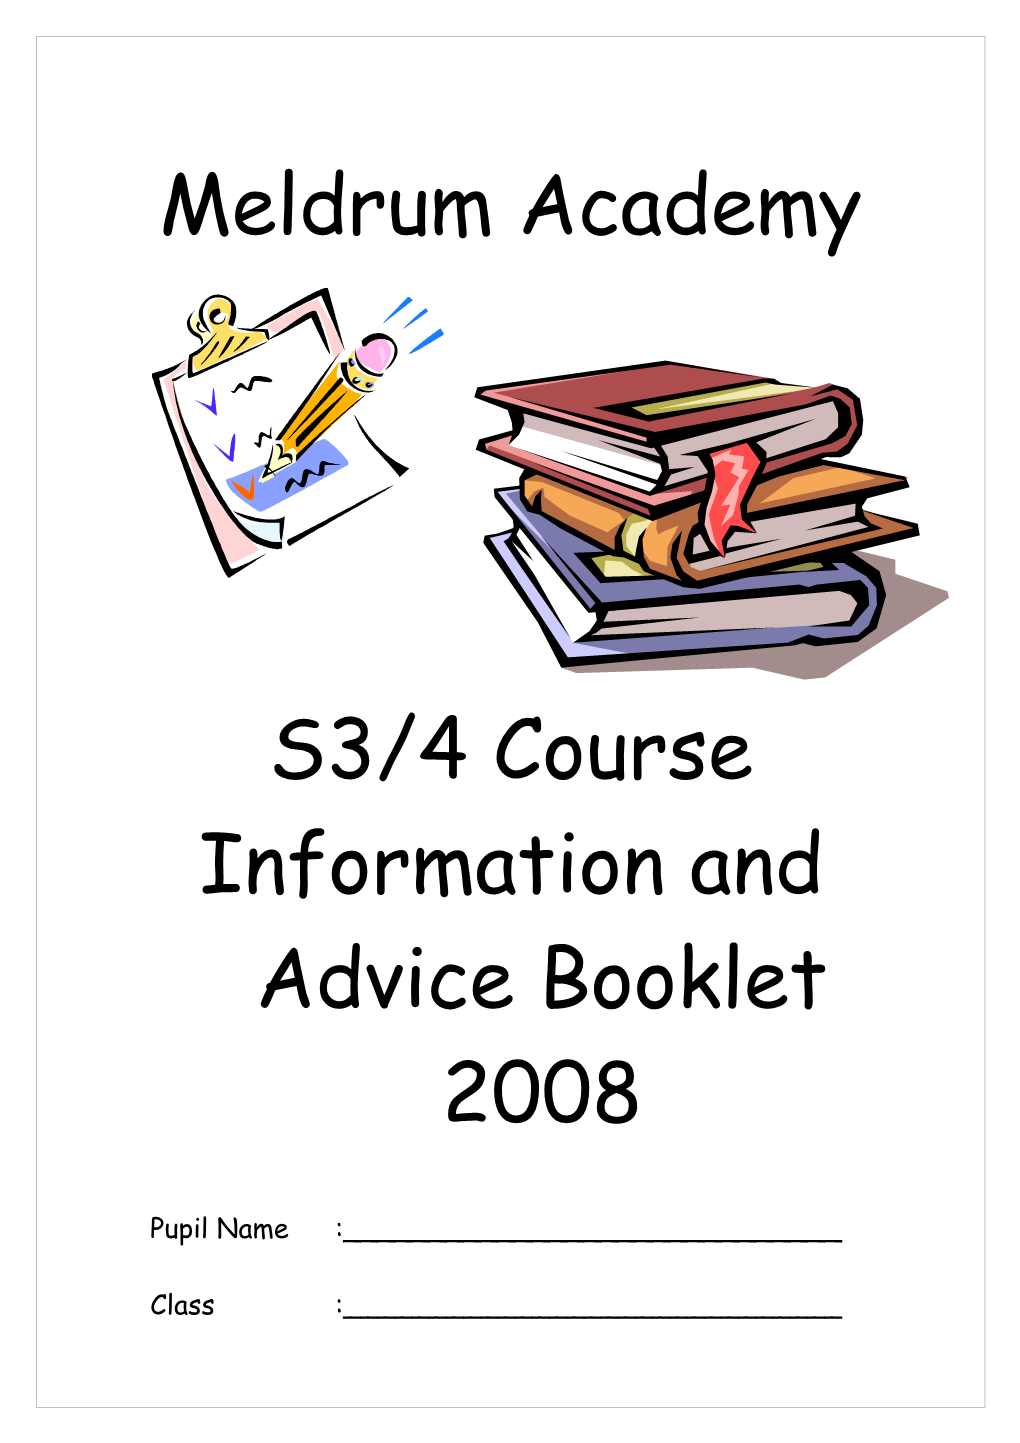 Information and Advice Booklet 2008